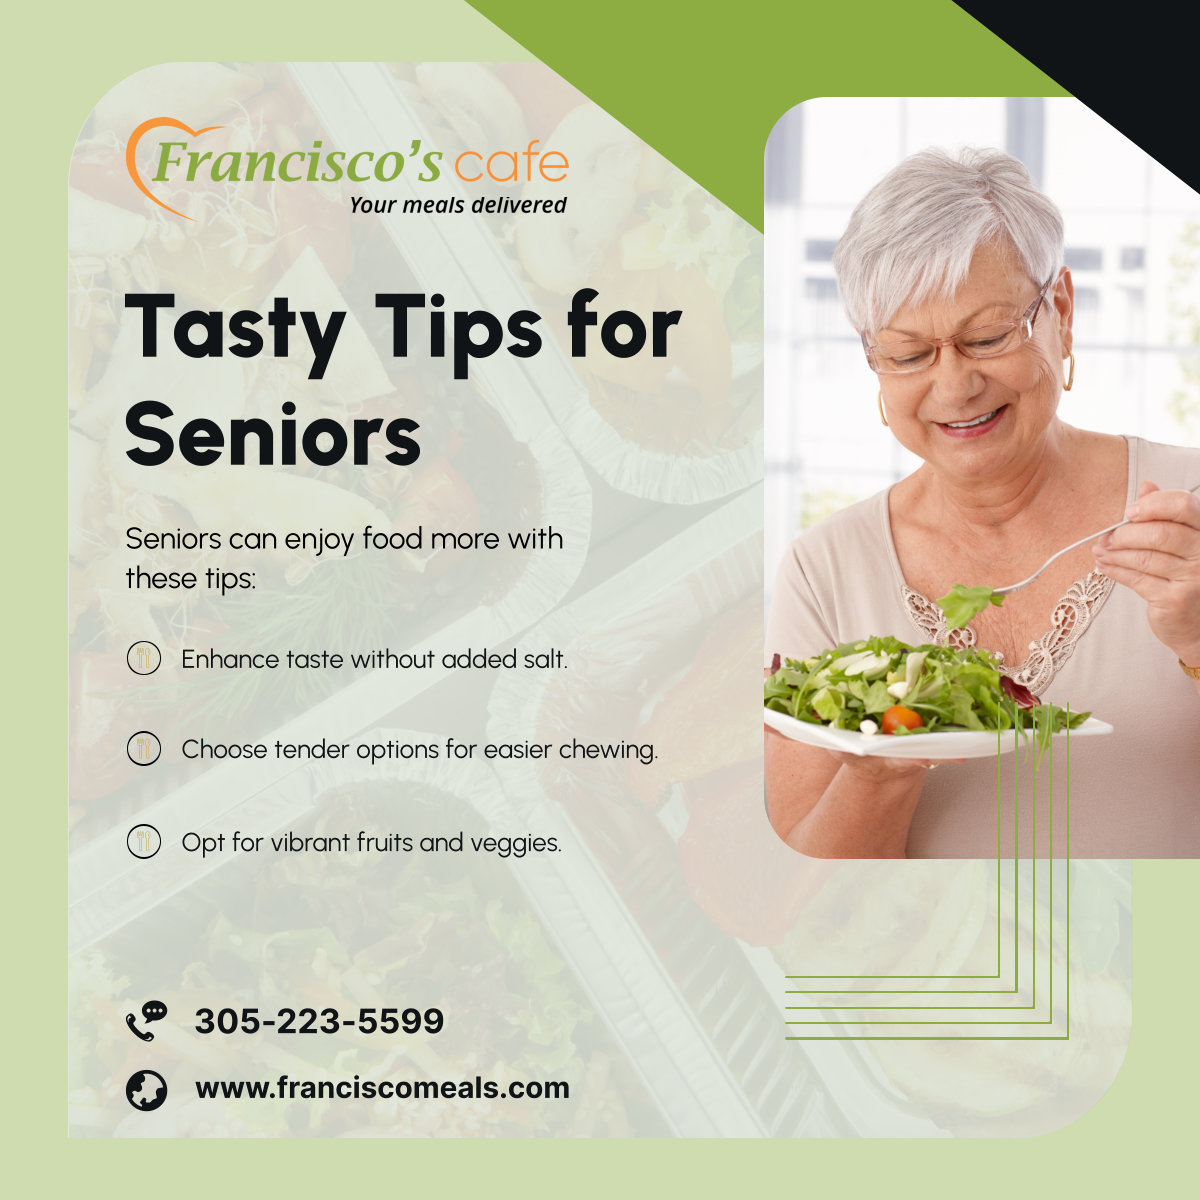 Elevate mealtime enjoyment for seniors with these delicious tips. Discover flavorful and nutritious options for a satisfying dining experience.

#SeniorNutrition #MiamiFL #MealsDeliveryServices